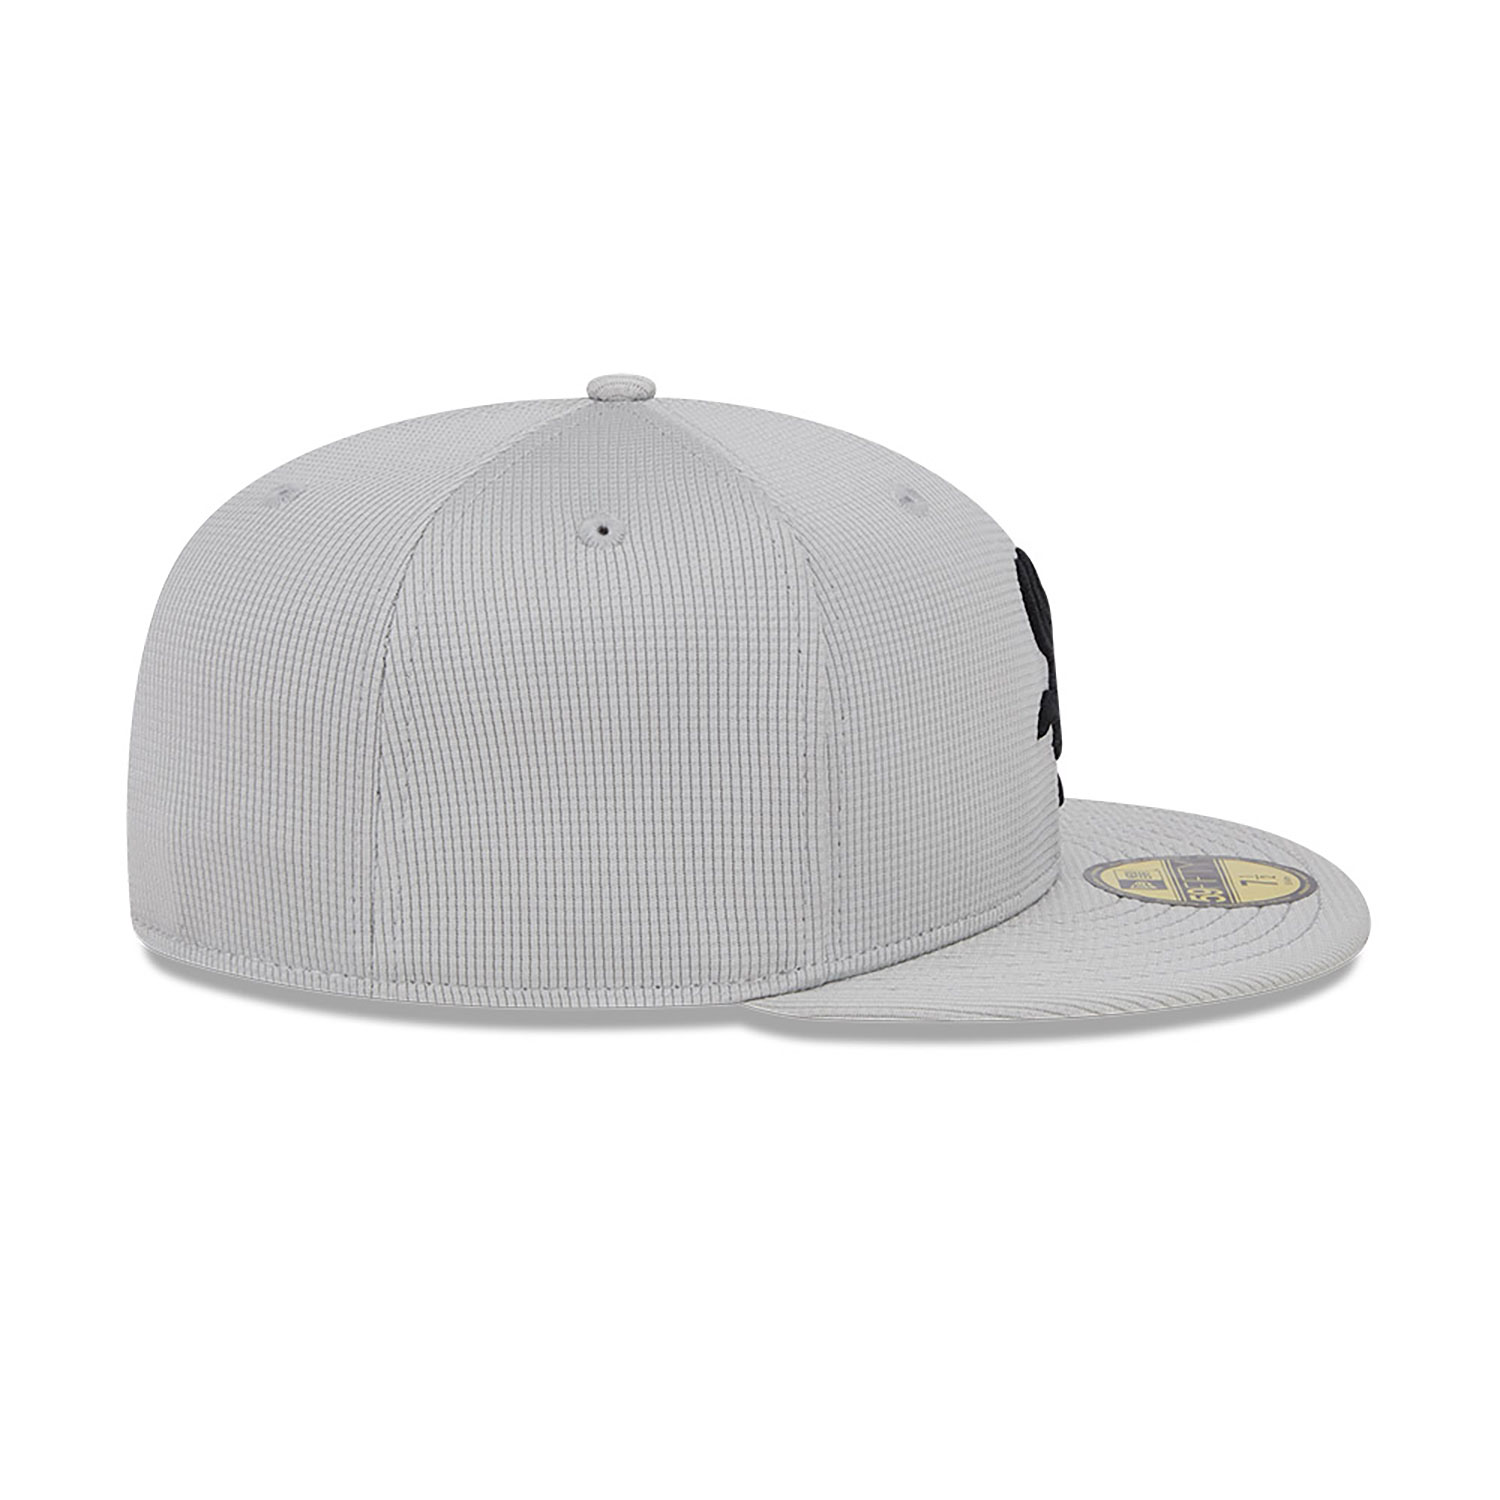 Chicago White Sox Spring Training Light Grey 59FIFTY Fitted Cap